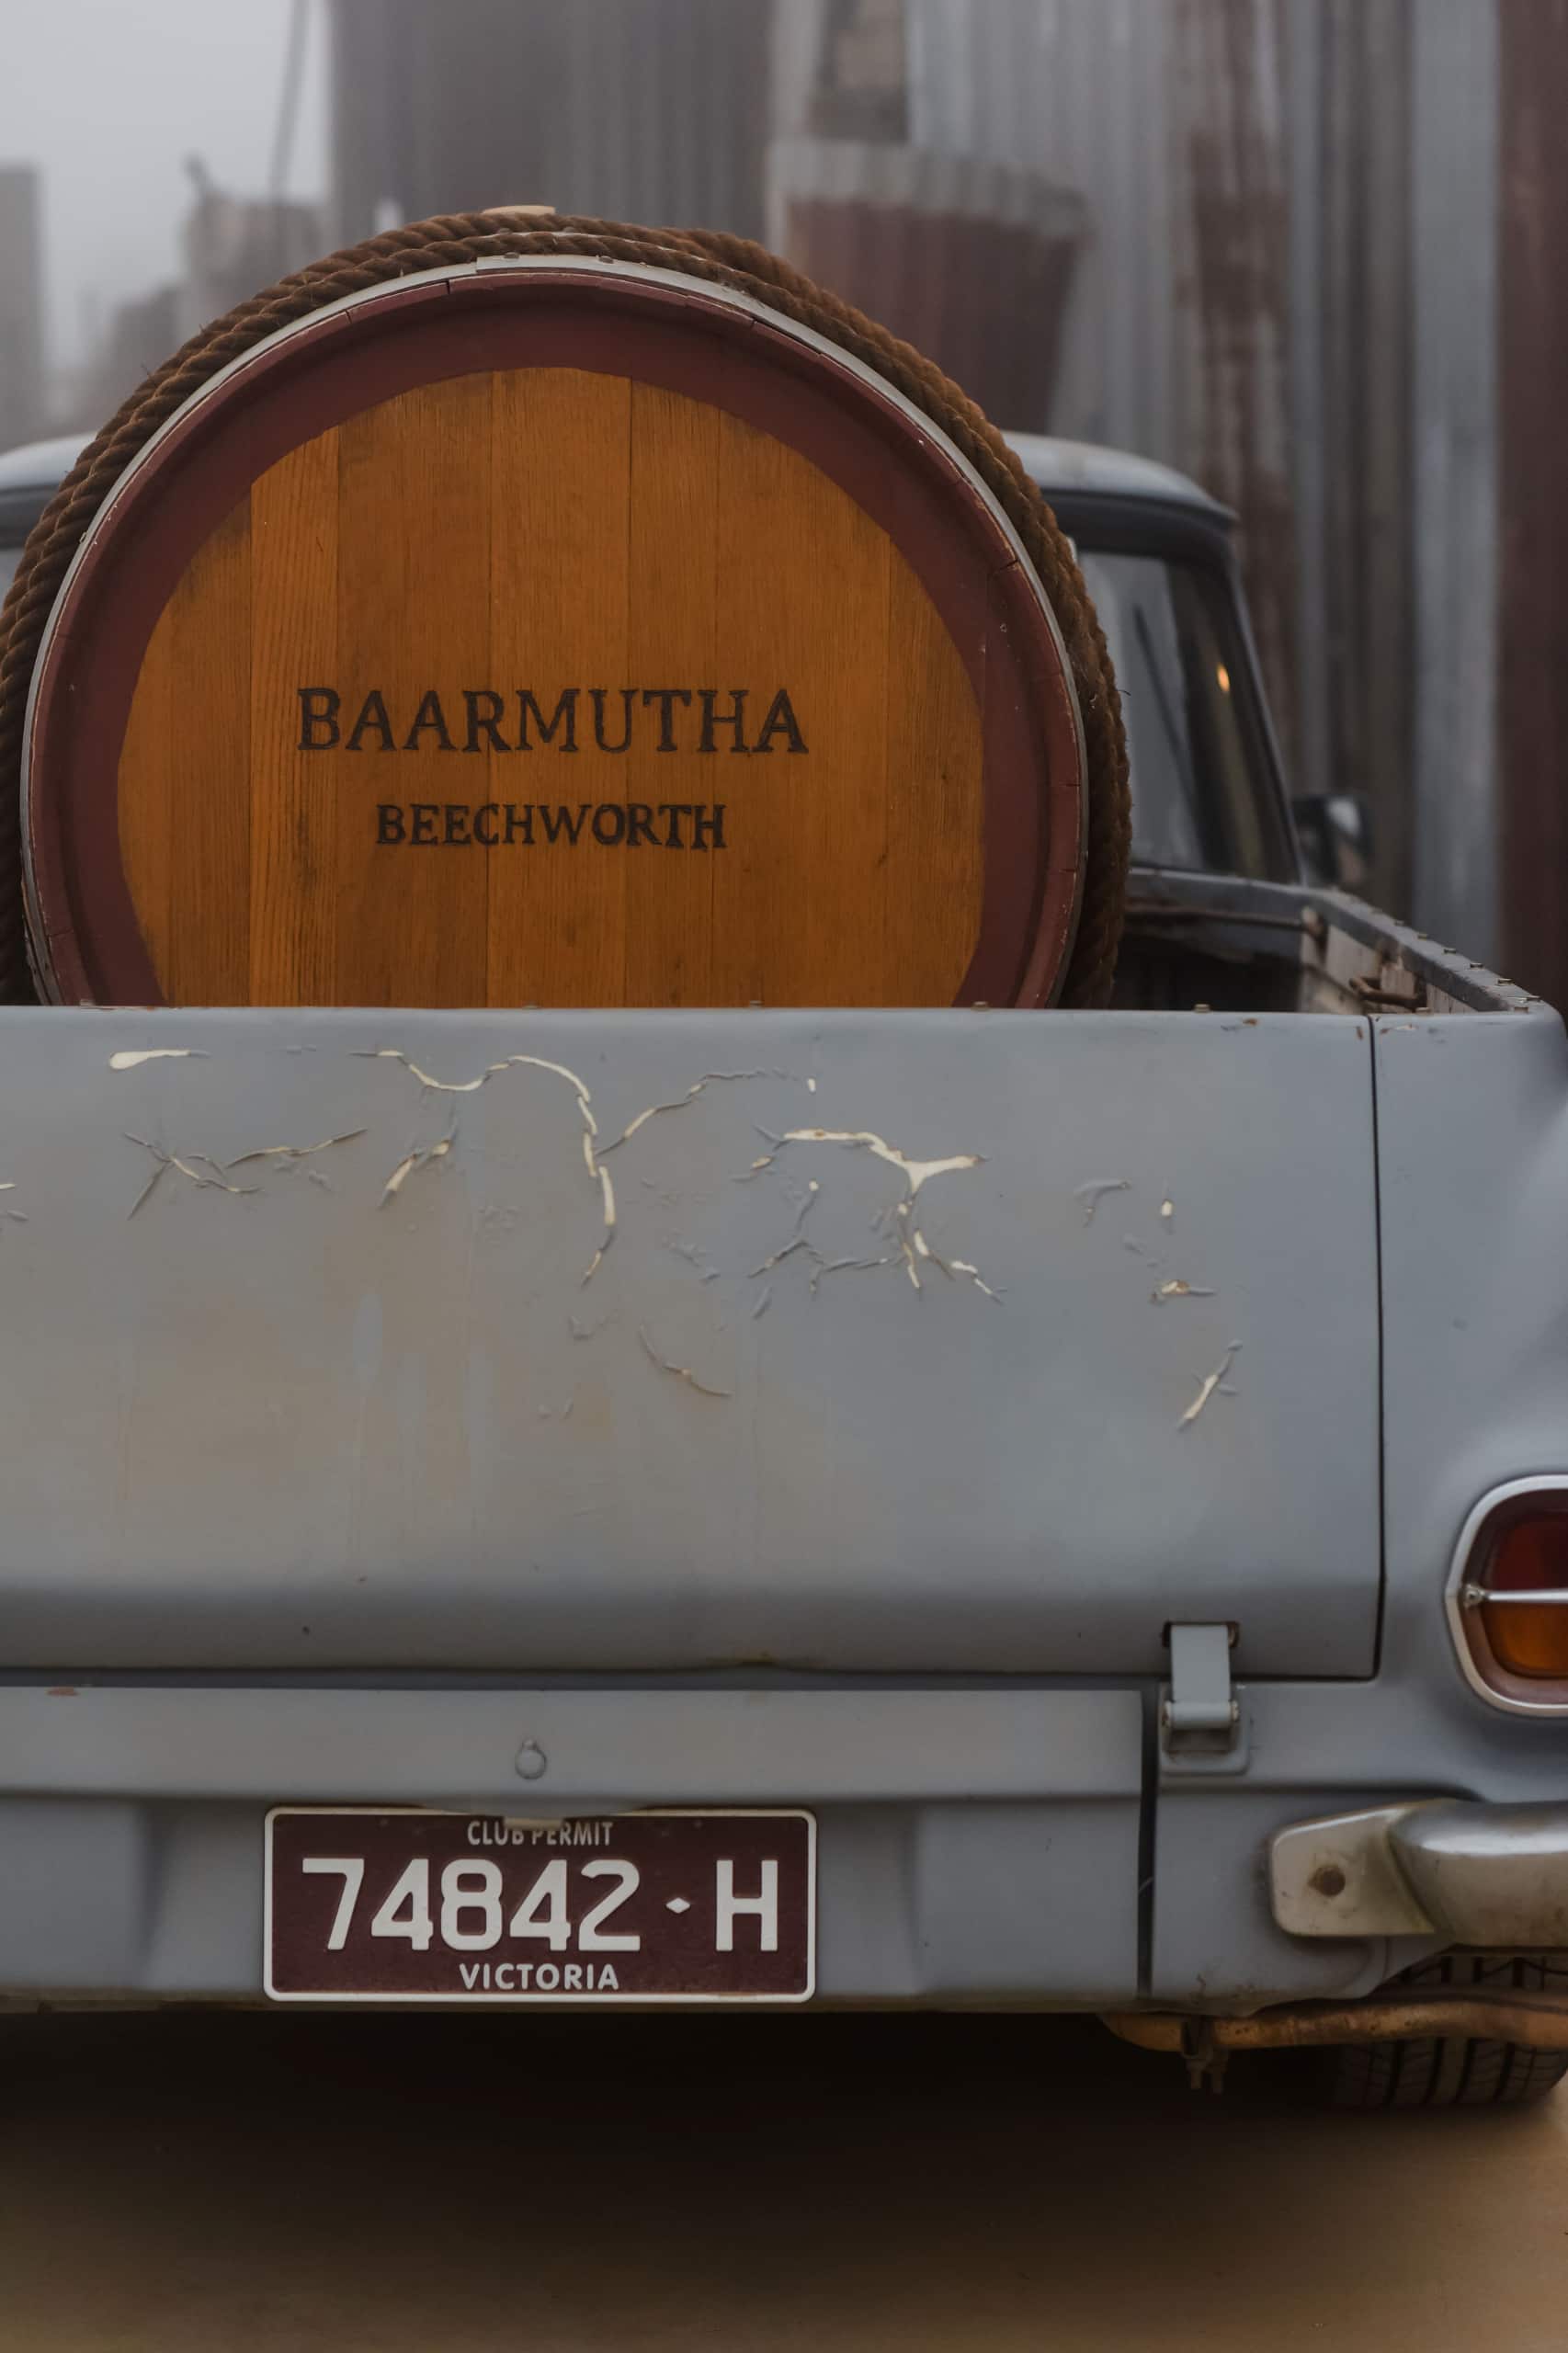 A wine barrel from Baarmutha Wines sitting in the back of a blue ute